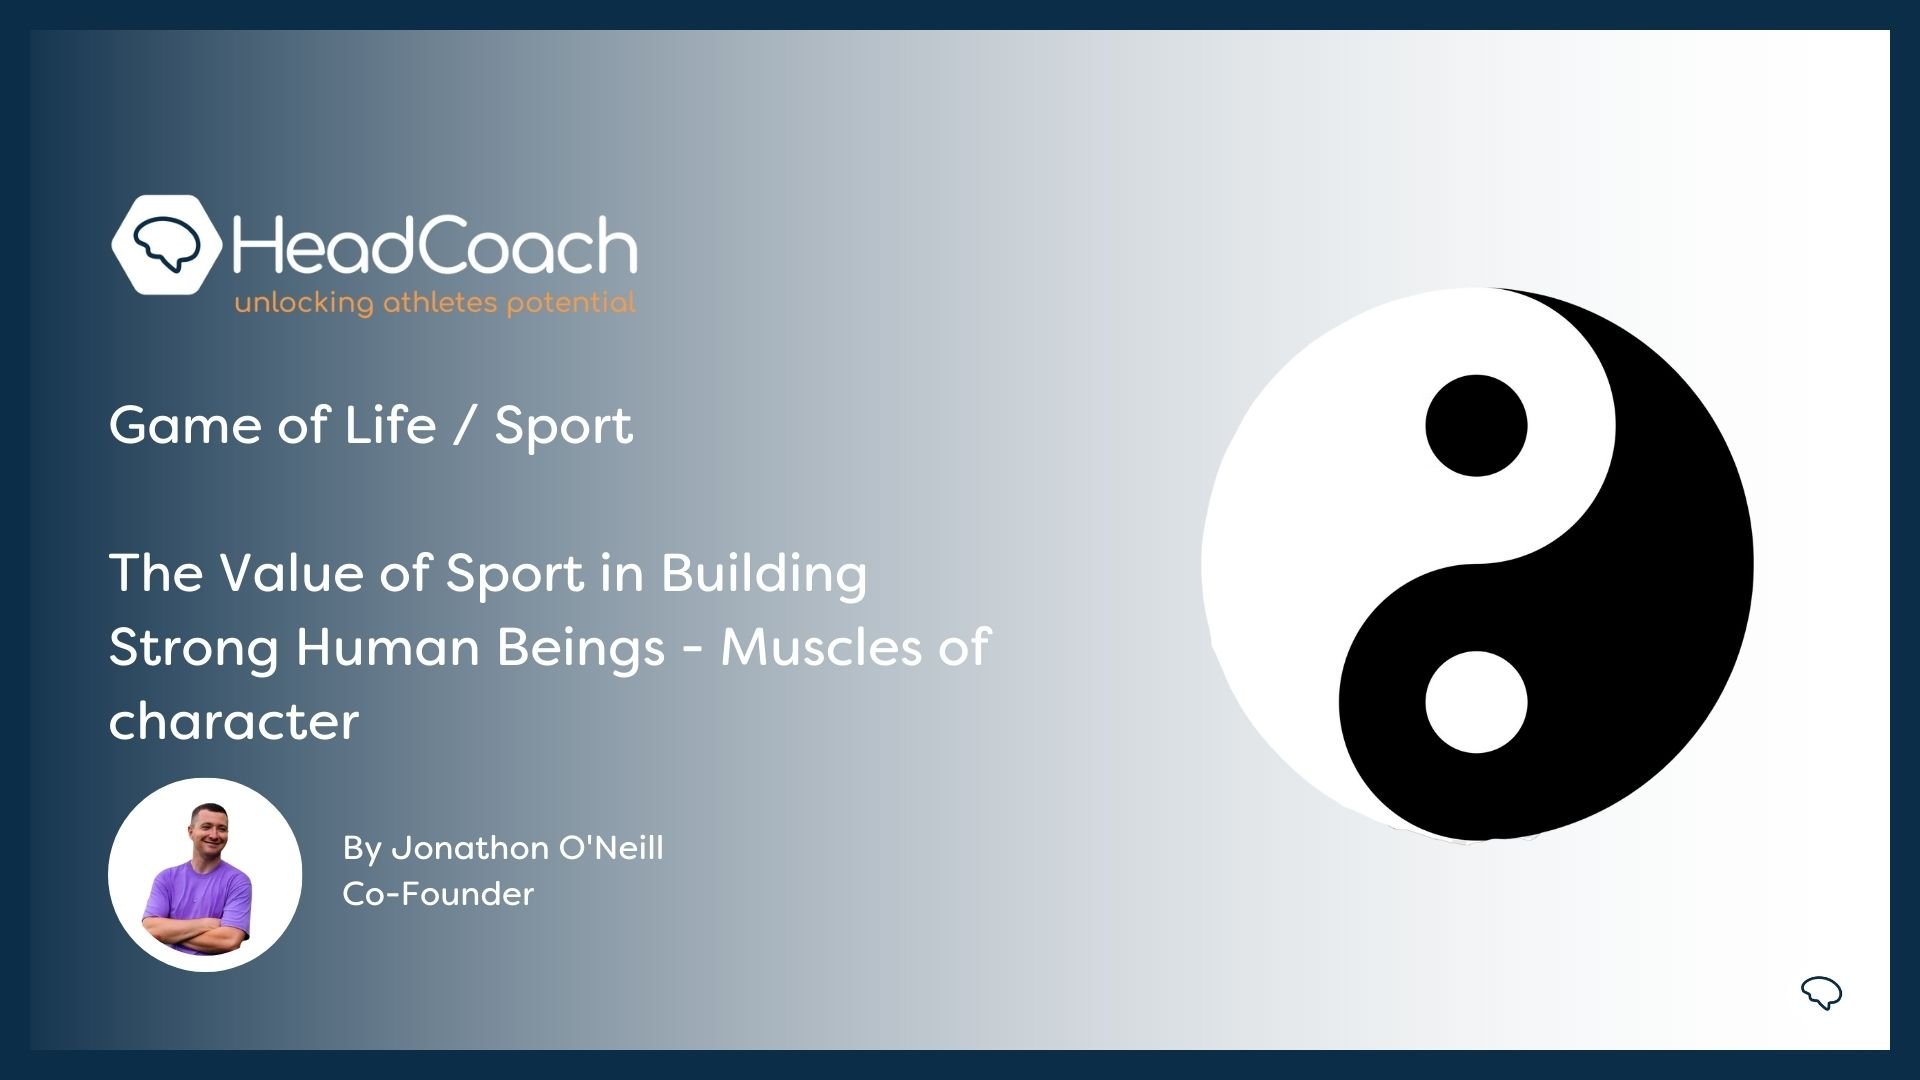 Game of Sport/Game of Life  The Value of Sport in Building Strong Human Beings - Muscles of character